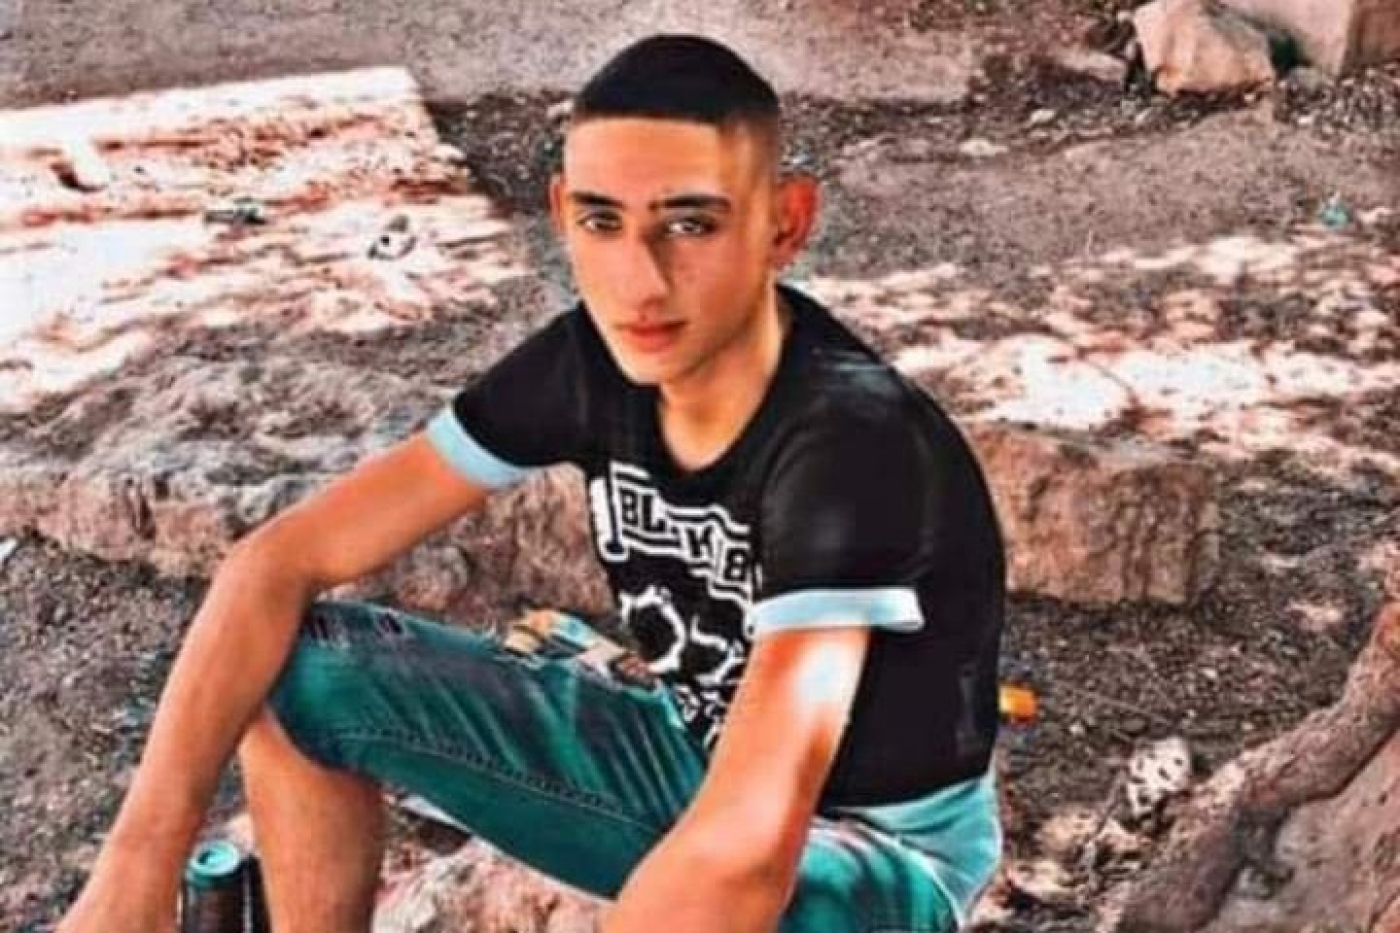 Odeh Mohammad Odeh was killed in the village of al-Midya west of Ramallah in the Israeli-occupied West Bank. (Twitter)